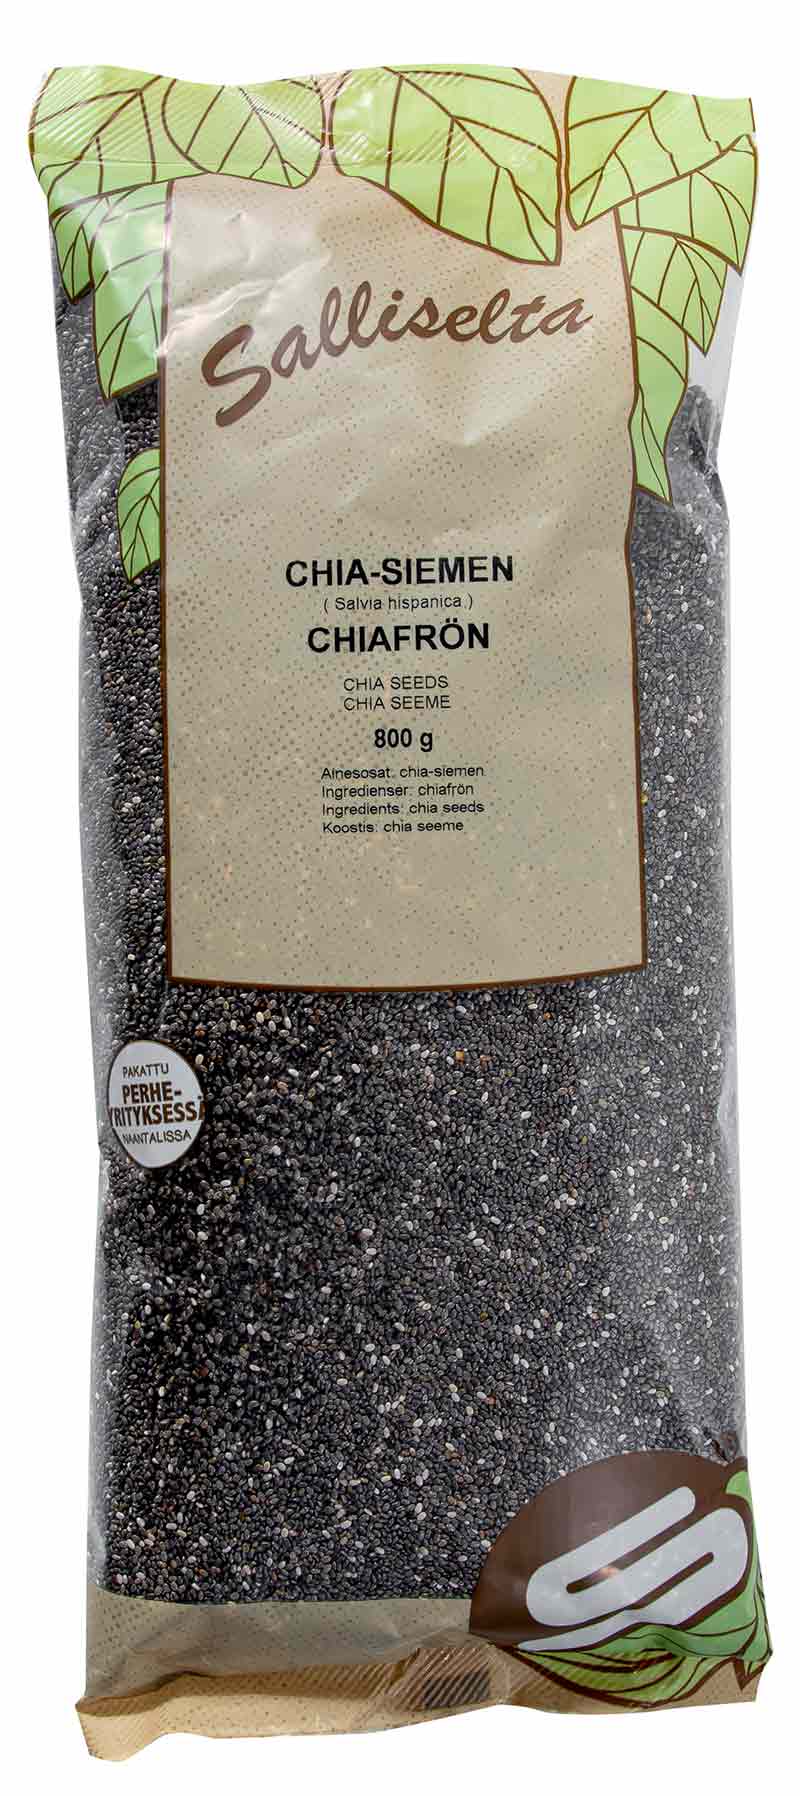 Chia seemned 800g